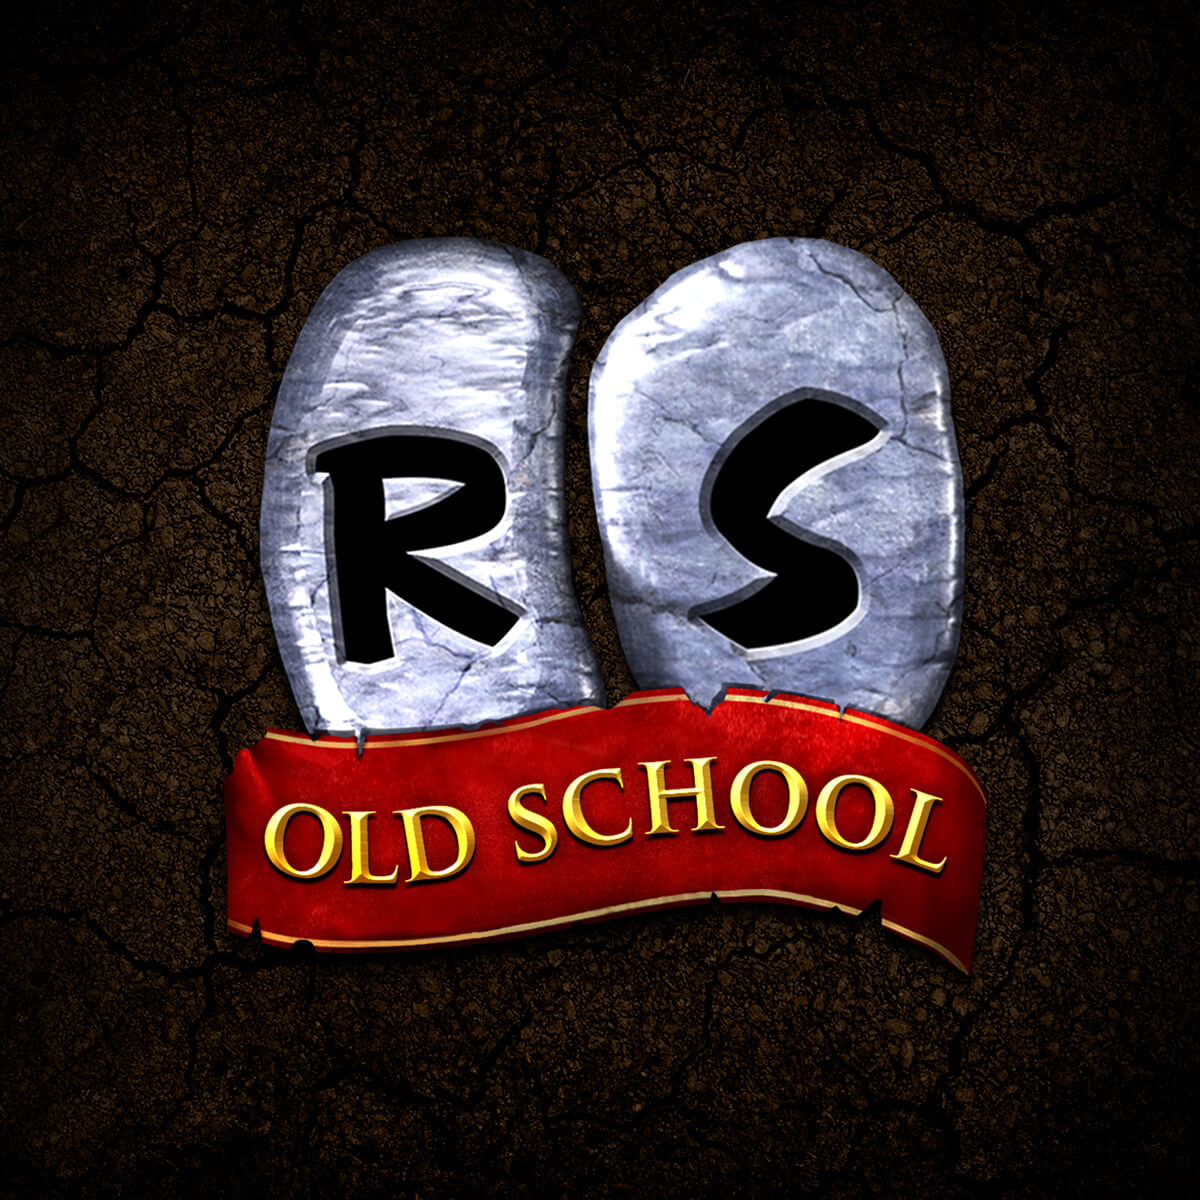 Old School RuneScape - Play Old School RS